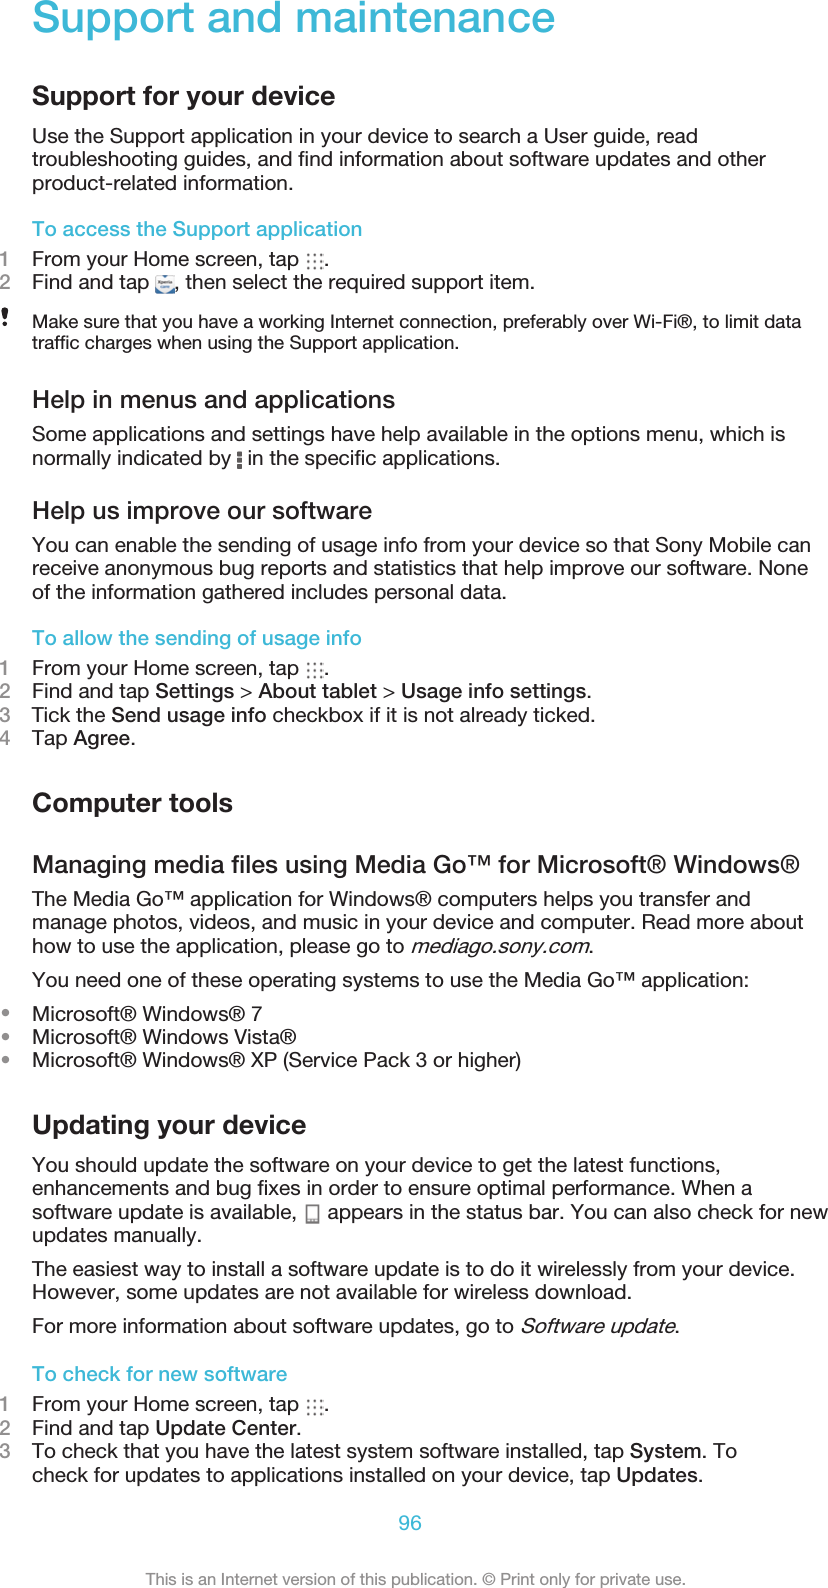 Support and maintenanceSupport for your deviceUse the Support application in your device to search a User guide, readtroubleshooting guides, and ﬁnd information about software updates and otherproduct-related information.To access the Support application1From your Home screen, tap  .2Find and tap  , then select the required support item.Make sure that you have a working Internet connection, preferably over Wi-Fi®, to limit datatrafﬁc charges when using the Support application.Help in menus and applicationsSome applications and settings have help available in the options menu, which isnormally indicated by   in the speciﬁc applications.Help us improve our softwareYou can enable the sending of usage info from your device so that Sony Mobile canreceive anonymous bug reports and statistics that help improve our software. Noneof the information gathered includes personal data.To allow the sending of usage info1From your Home screen, tap  .2Find and tap Settings &gt; About tablet &gt; Usage info settings.3    Tick the Send usage info checkbox if it is not already ticked.4Tap Agree.Computer tools96This is an Internet version of this publication. © Print only for private use.Managing media ﬁles using Media Go™ for Microsoft® Windows®The Media Go™ application for Windows® computers helps you transfer andmanage photos, videos, and music in your device and computer. Read more abouthow to use the application, please go to mediago.sony.com.You need one of these operating systems to use the Media Go™ application:•Microsoft® Windows® 7•Microsoft® Windows Vista®•Microsoft® Windows® XP (Service Pack 3 or higher)Updating your deviceYou should update the software on your device to get the latest functions,enhancements and bug ﬁxes in order to ensure optimal performance. When asoftware update is available,   appears in the status bar. You can also check for newupdates manually.The easiest way to install a software update is to do it wirelessly from your device.However, some updates are not available for wireless download.For more information about software updates, go to Software update.To check for new software1From your Home screen, tap  .2Find and tap Update Center.3To check that you have the latest system software installed, tap System. Tocheck for updates to applications installed on your device, tap Updates.